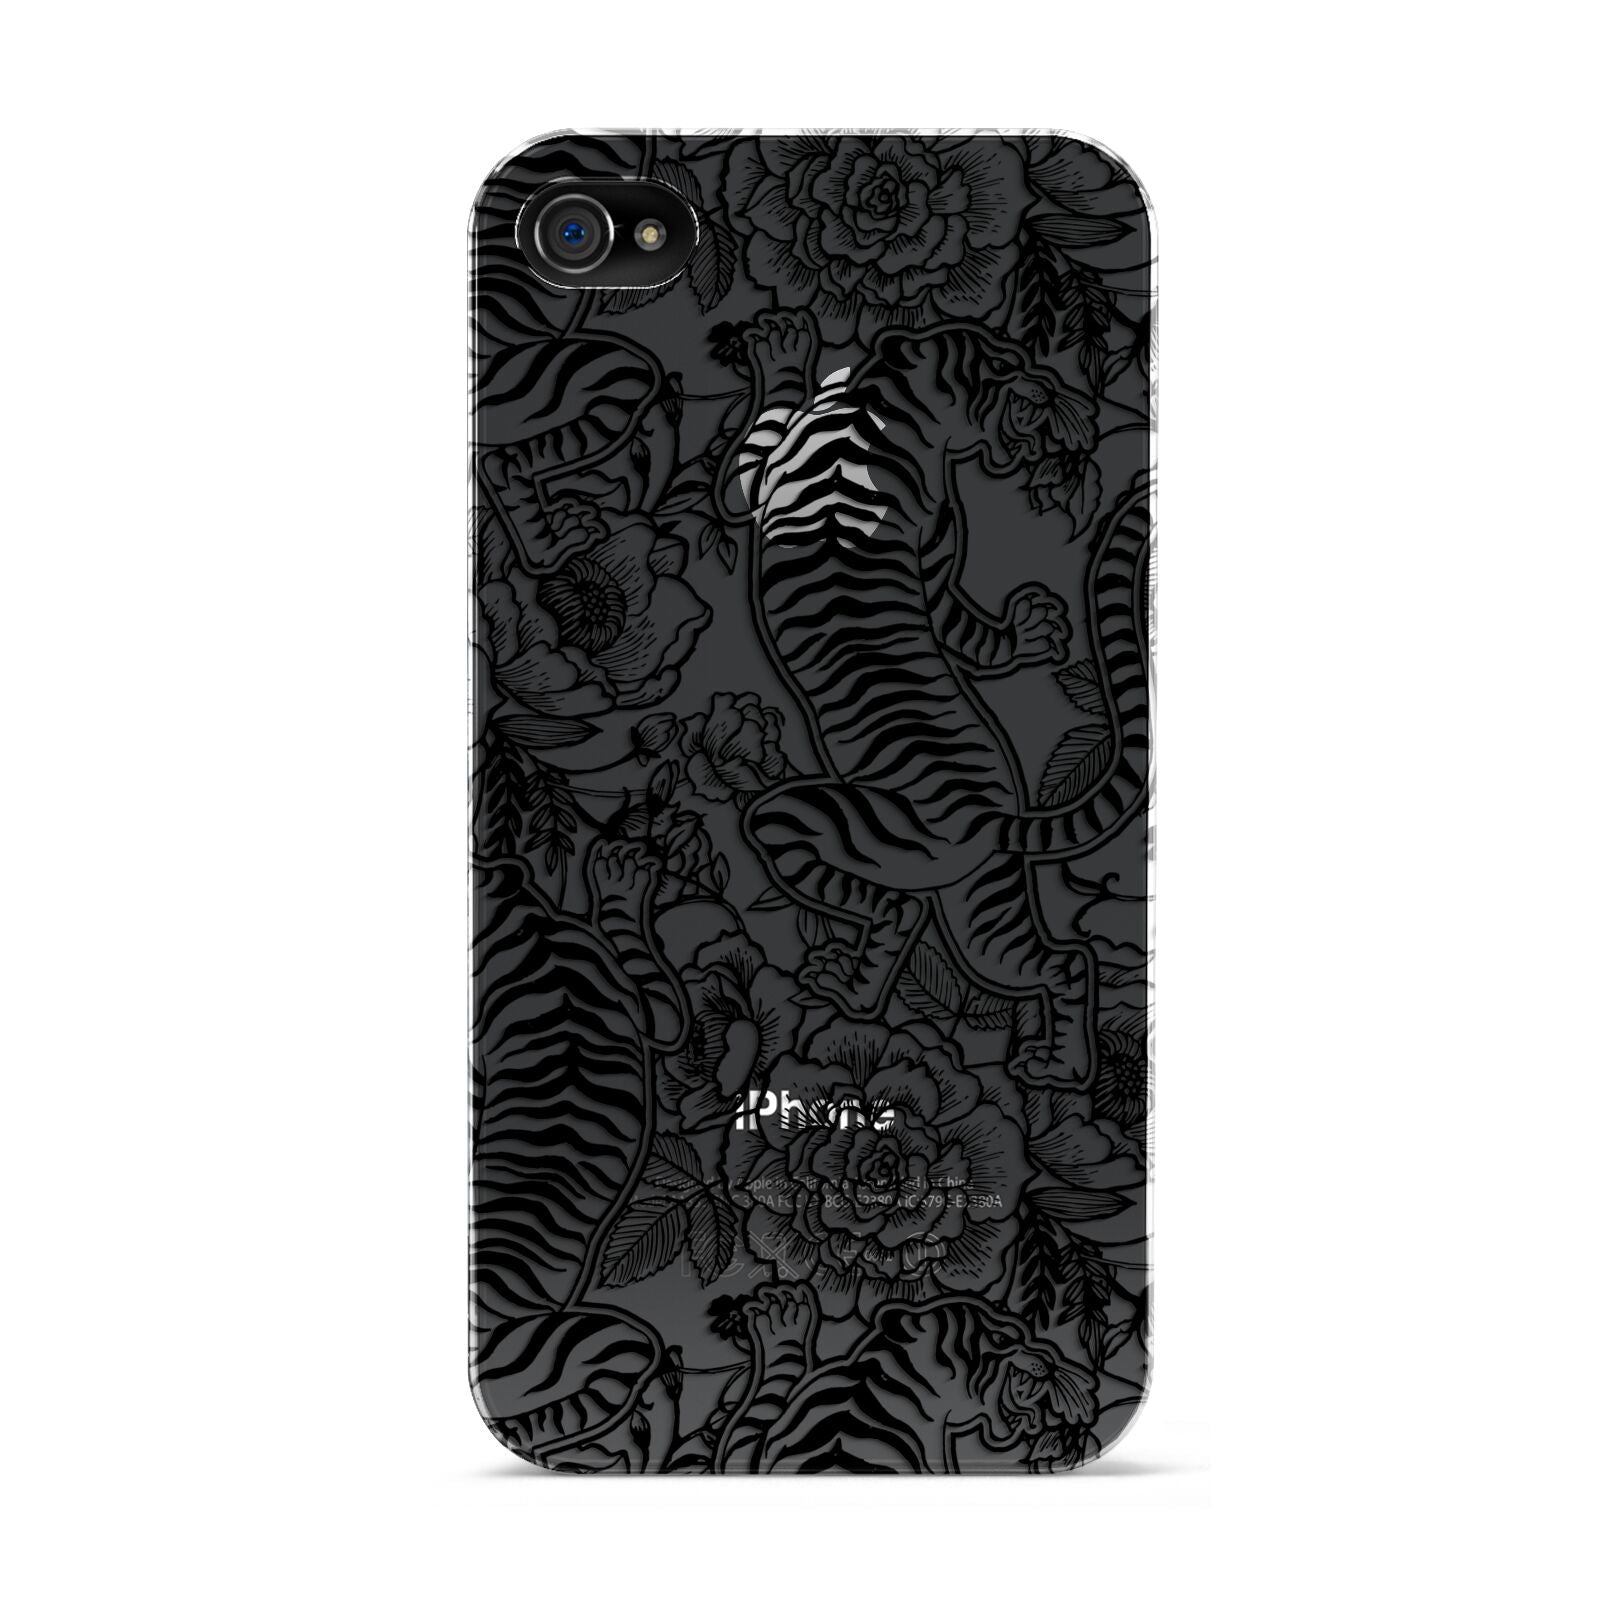 Chinese Tiger Apple iPhone 4s Case